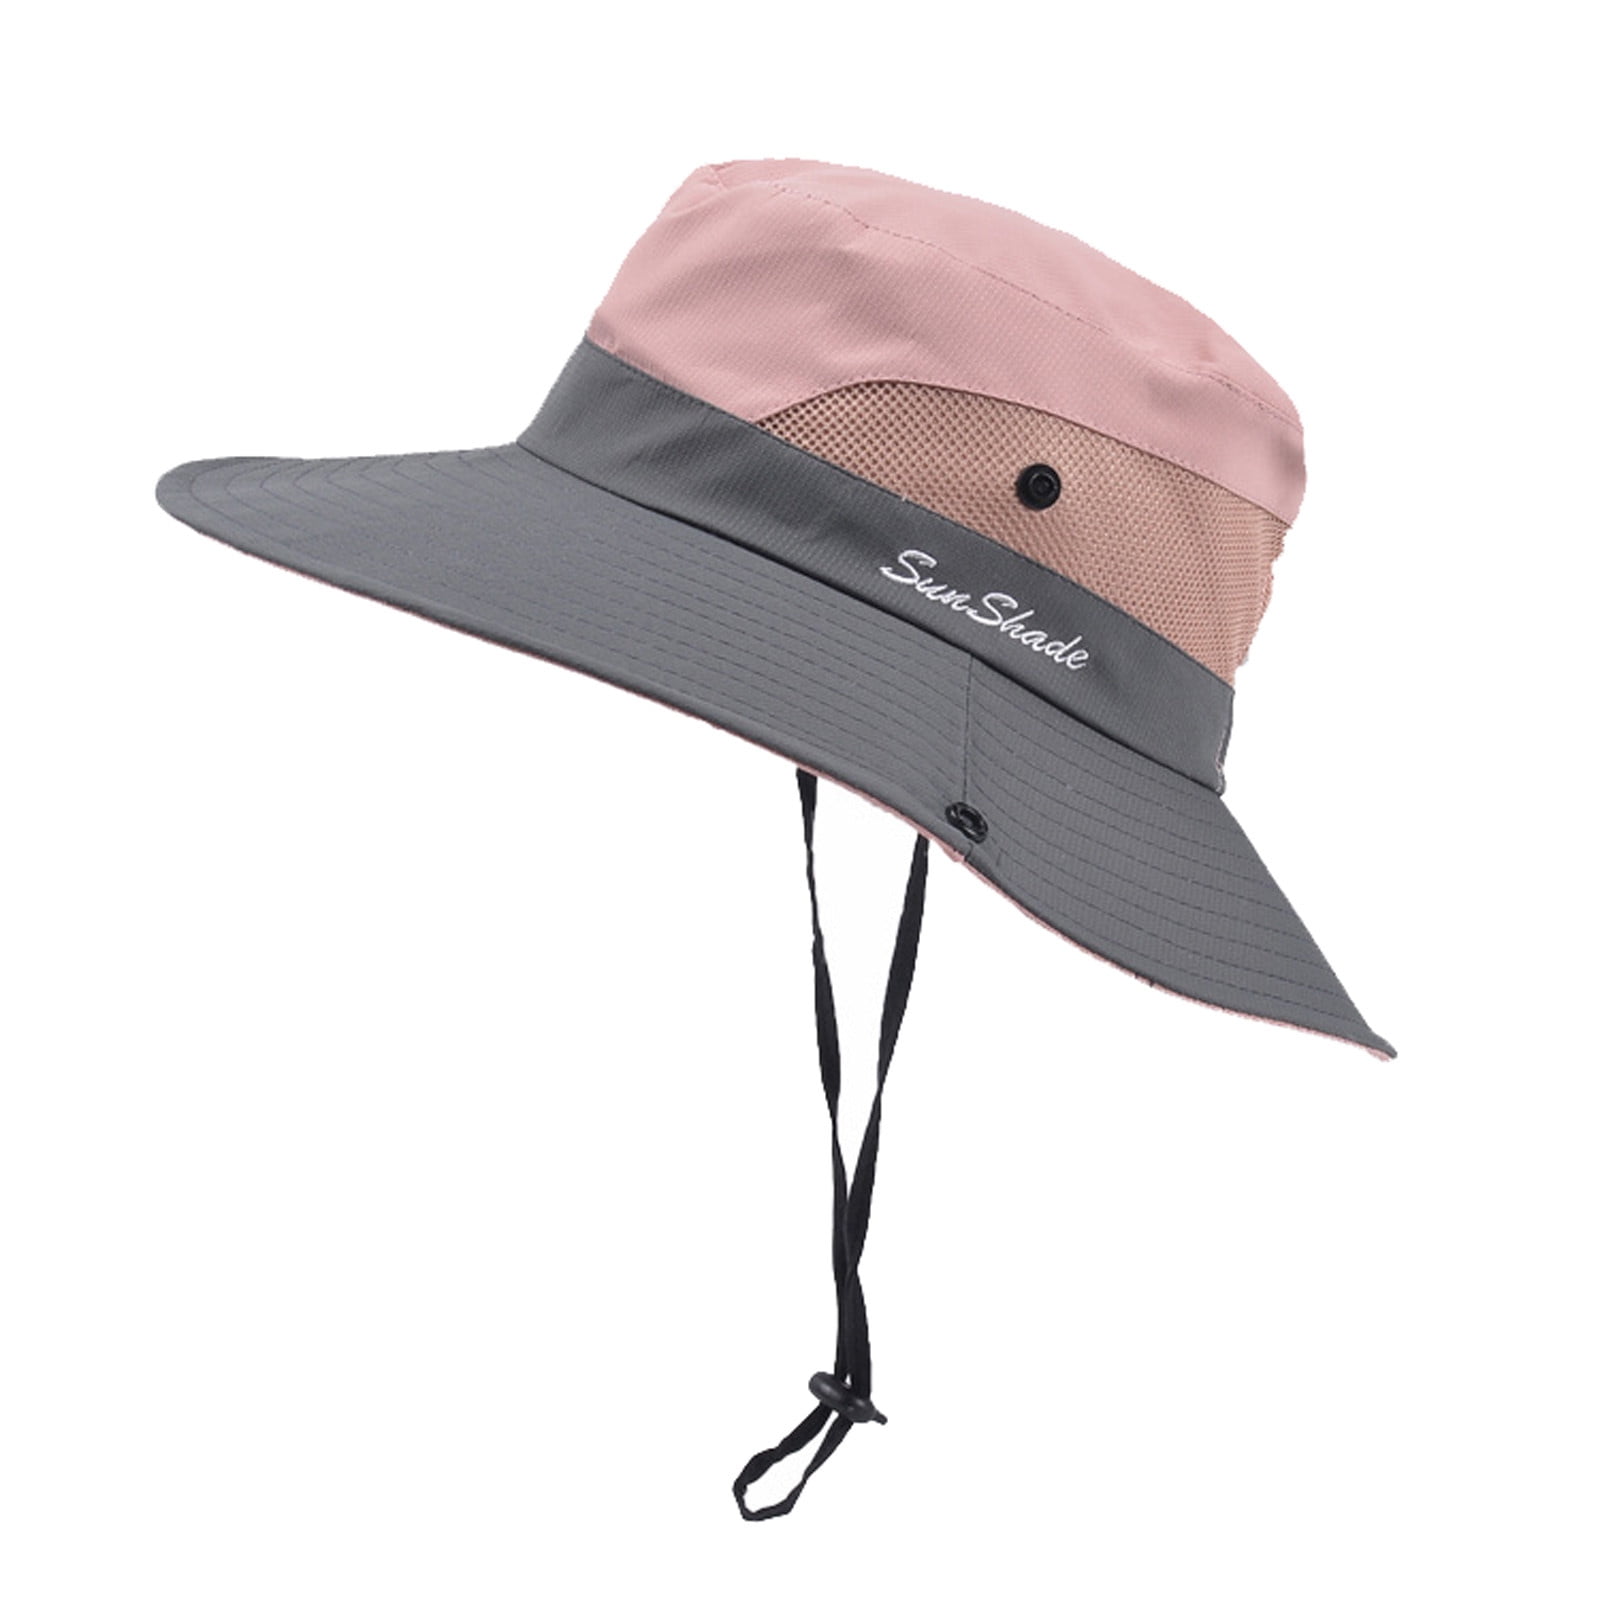 Summer UPF50+ Sun Visor Hats for Women Wide Brim Outdoor Foldable Fishing  Hat Breathable Hiking Fishing Beach Sun Cap with Neck Flap 